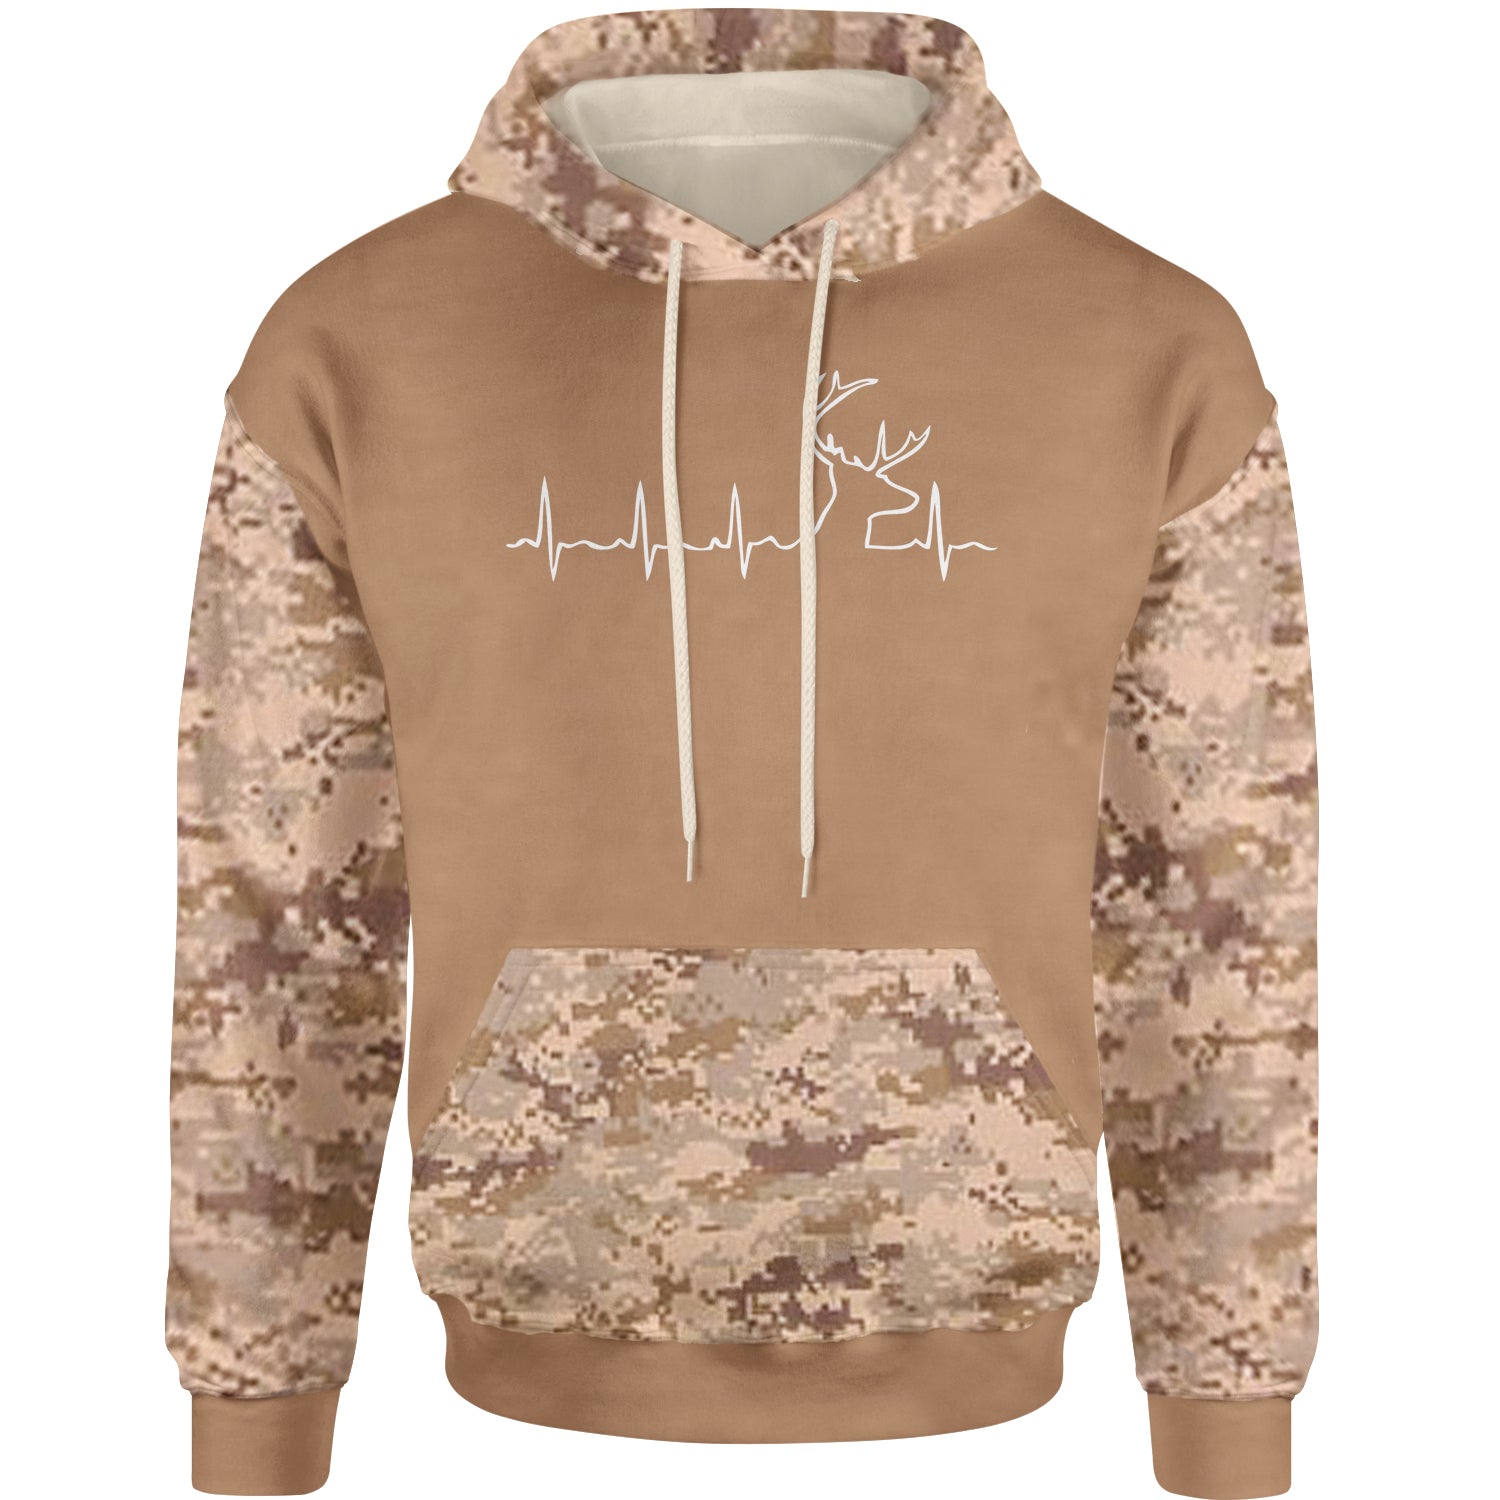 Hunting Heartbeat Dear Head Adult Hoodie Sweatshirt #expressiontees by Expression Tees